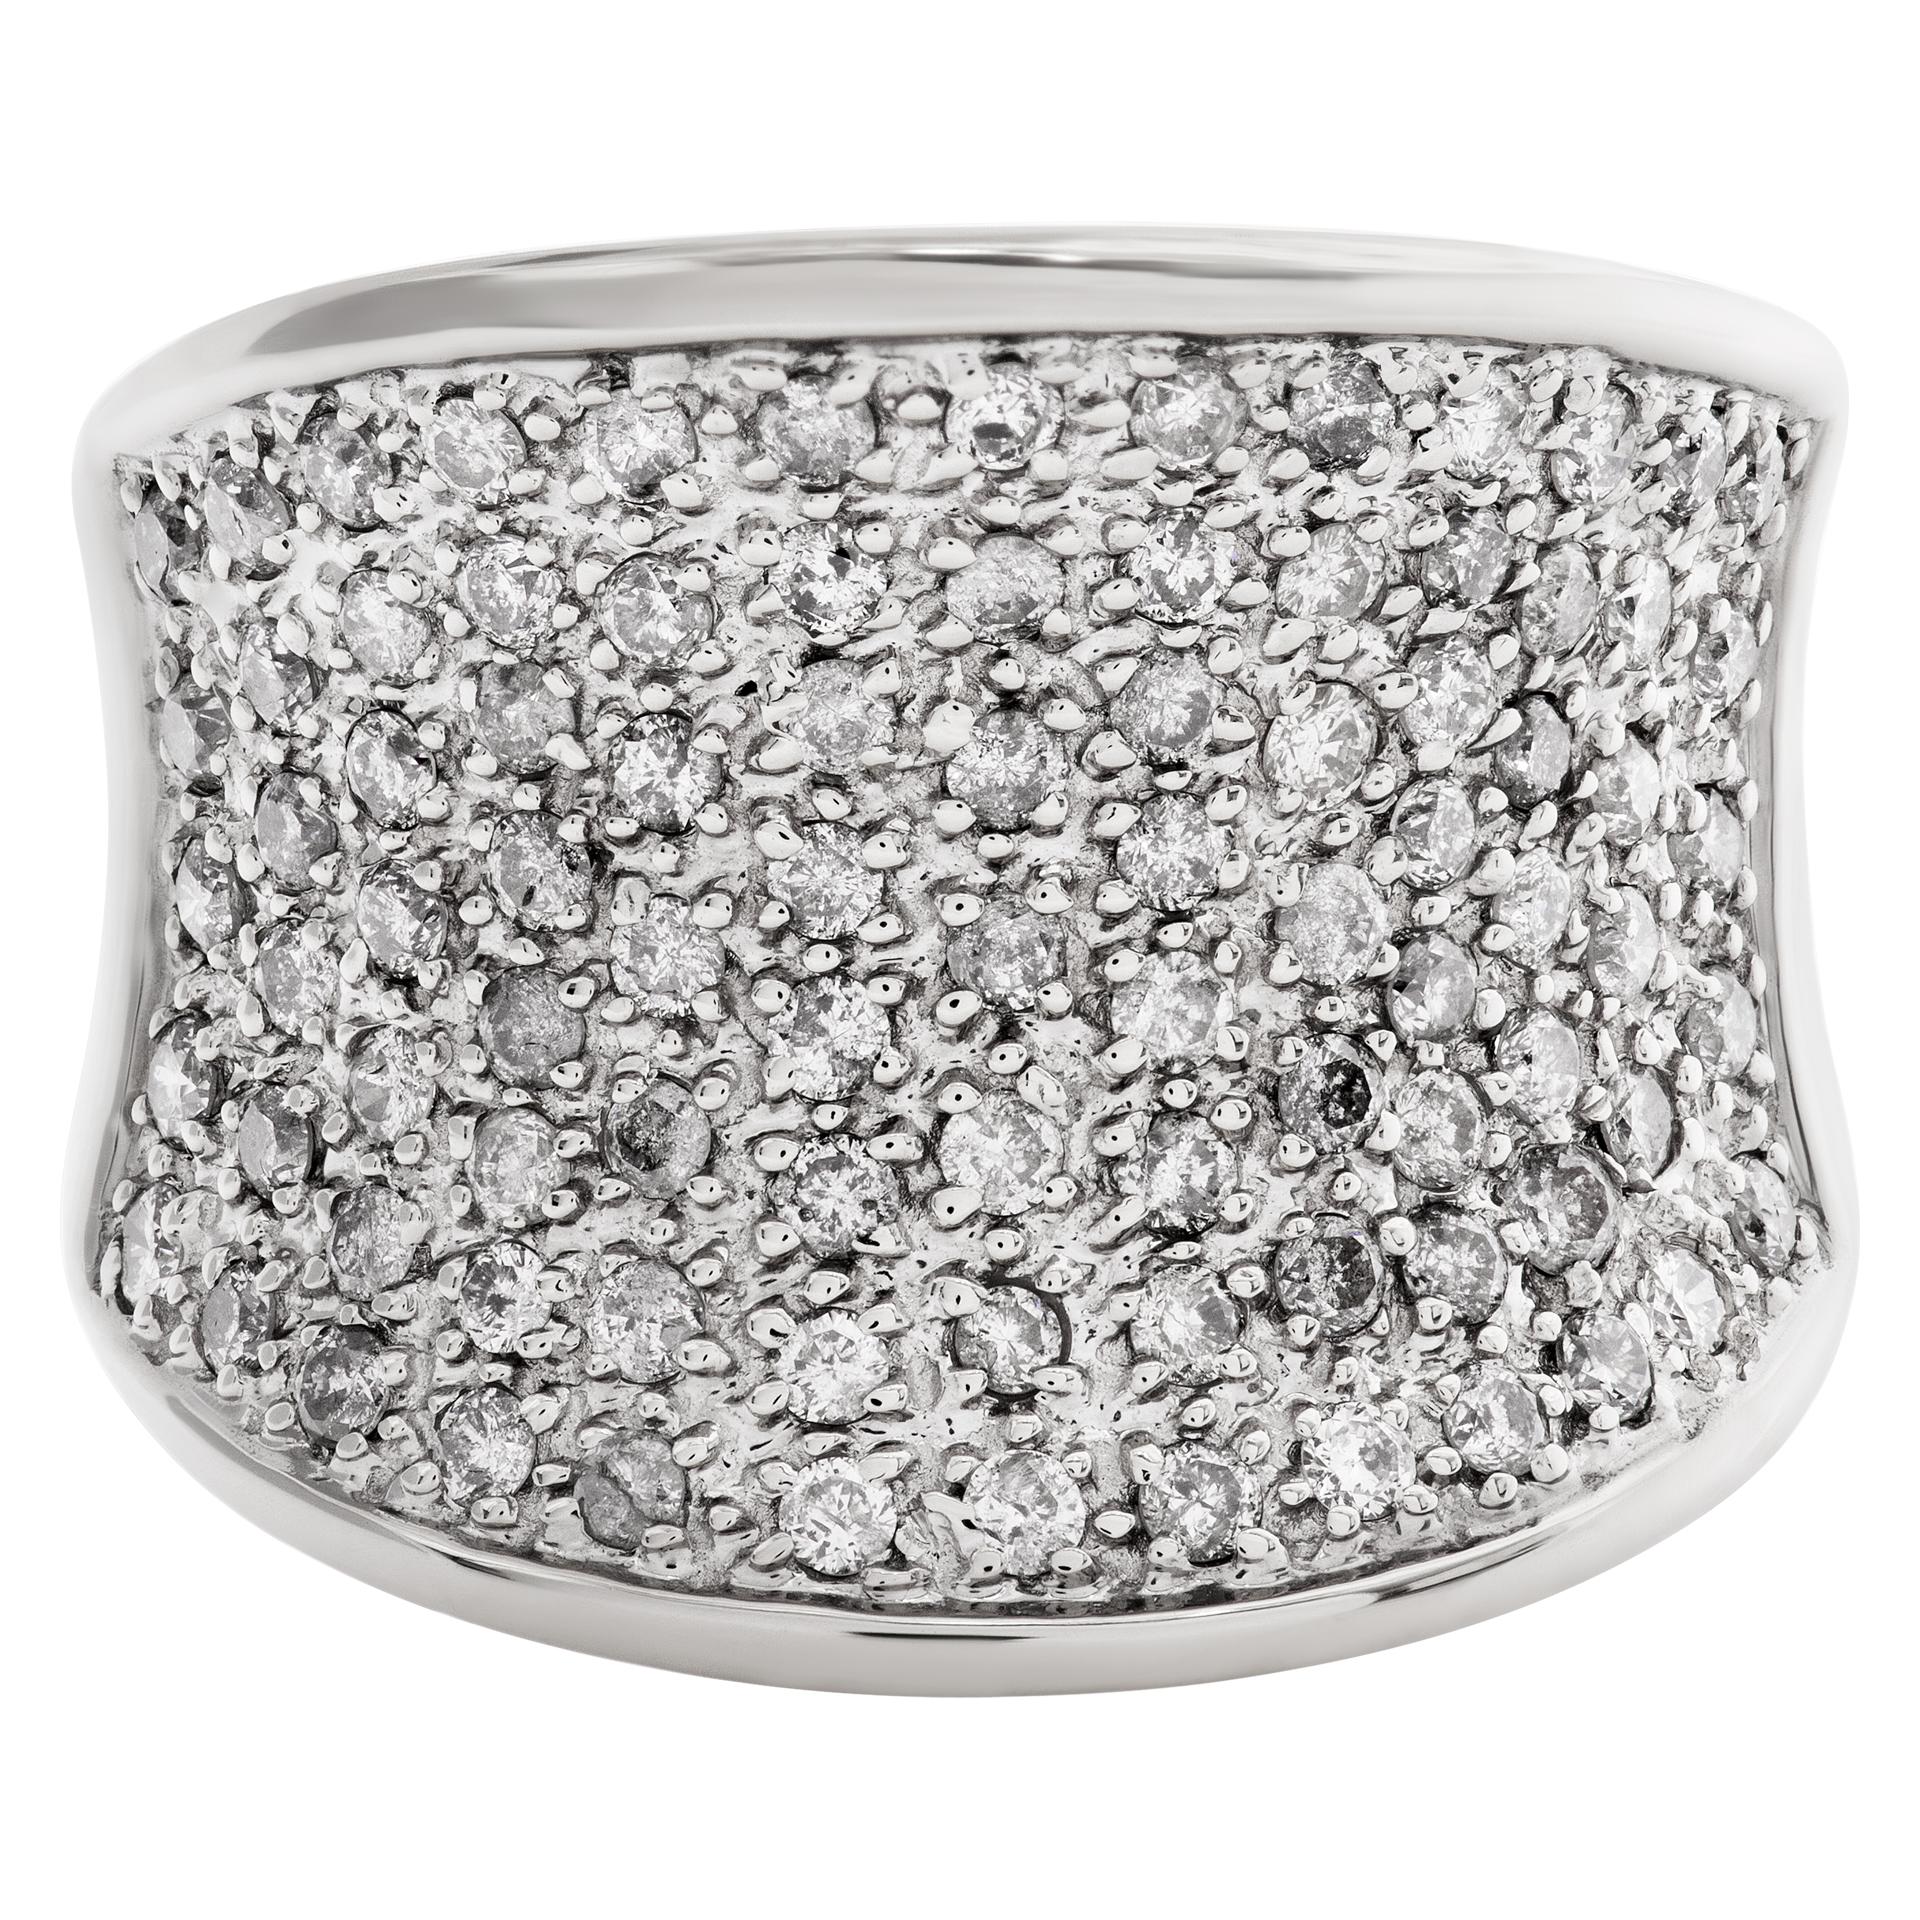 Wide pave diamond ring in 14k white gold, with over 2.50 carats in G-H color, VS clarity diamonds. Size 7.75.  This Diamond ring is currently size 7.75 and some items can be sized up or down, please ask! It weighs 6.2 pennyweights and is 14k White